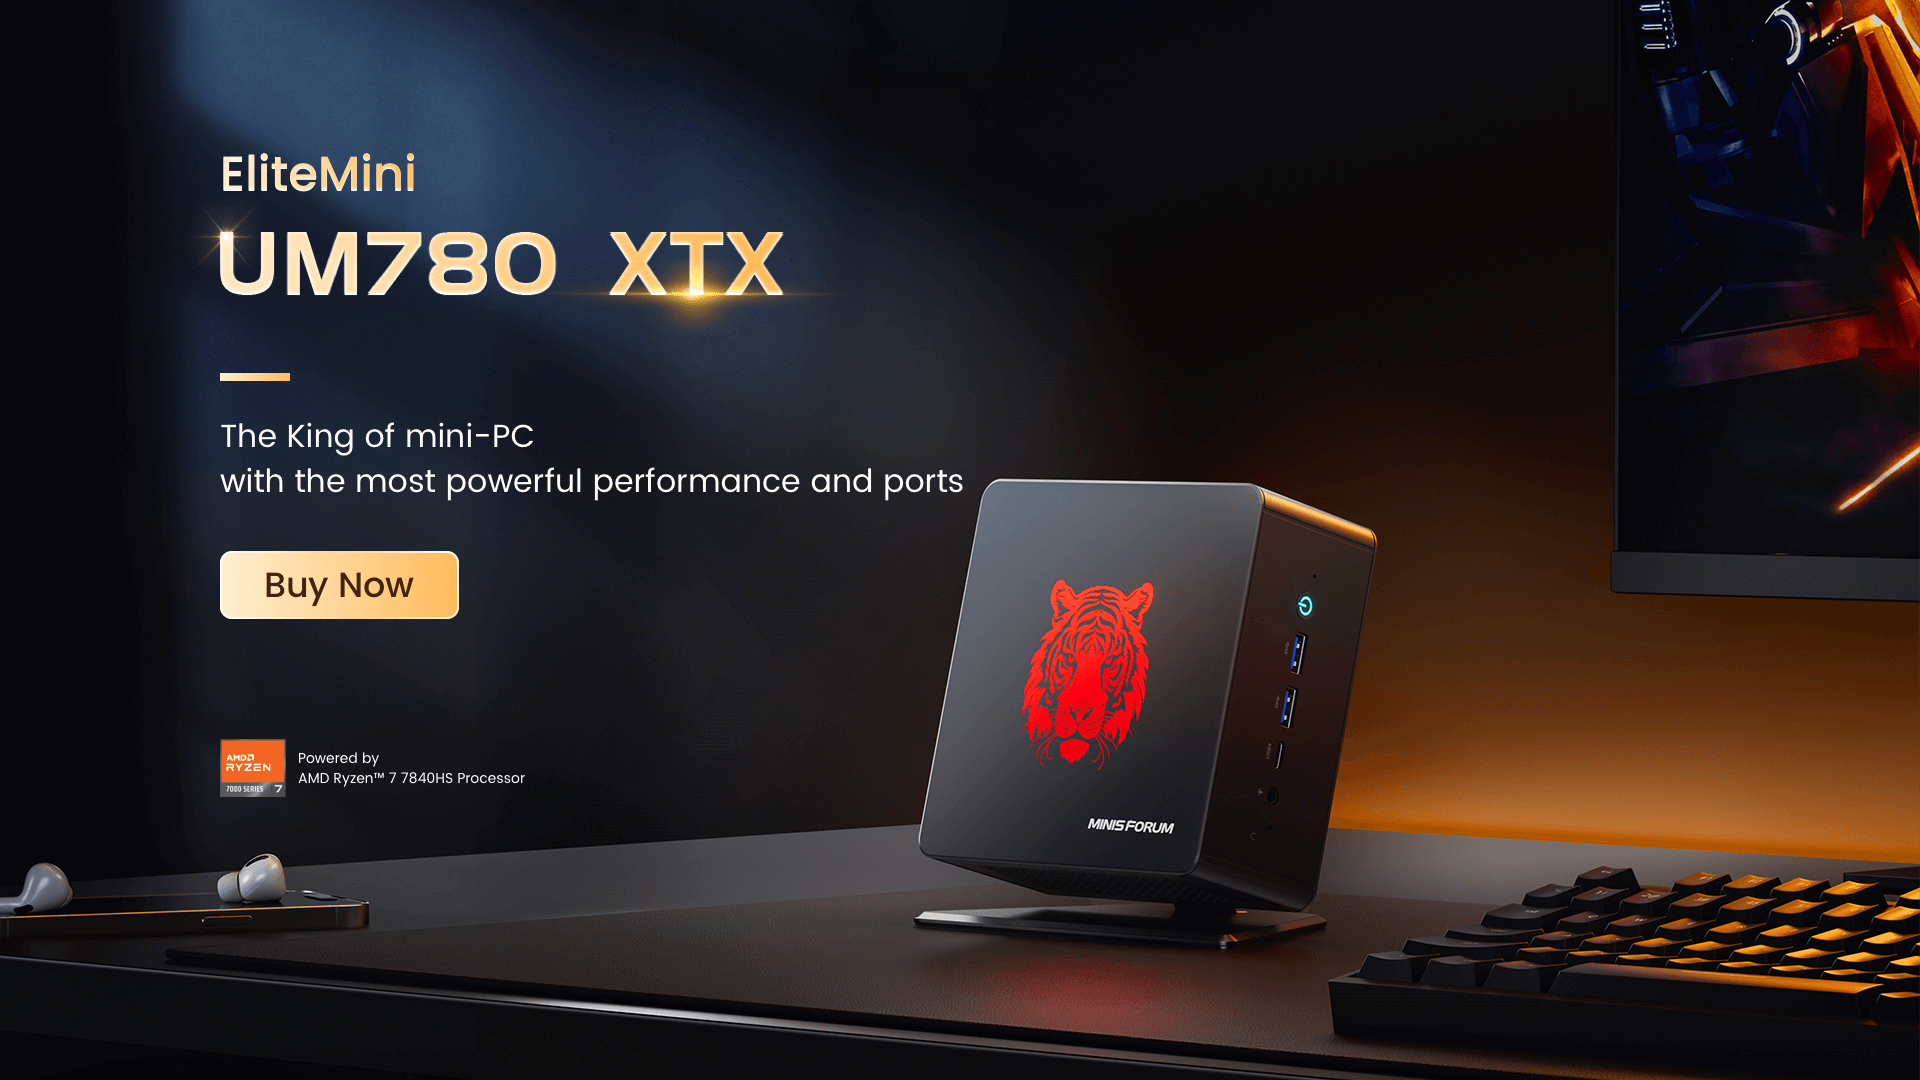 the king of mini PCs with the most powerful performance and ports